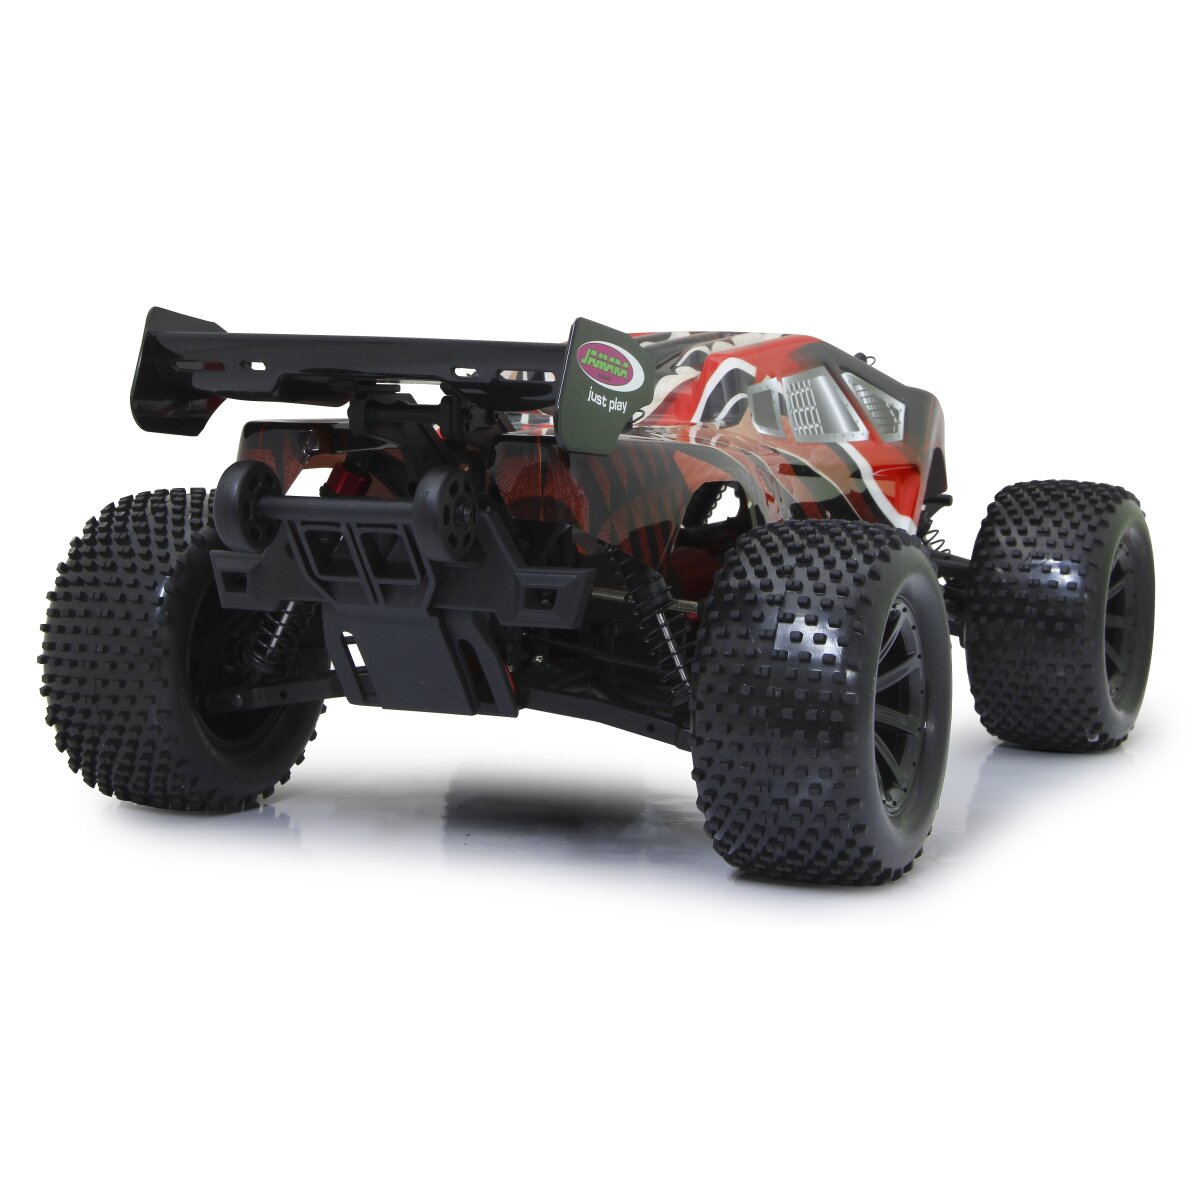 Brecter Truggy BL 4WD 1:10 Lipo 2,4GHz mit LED